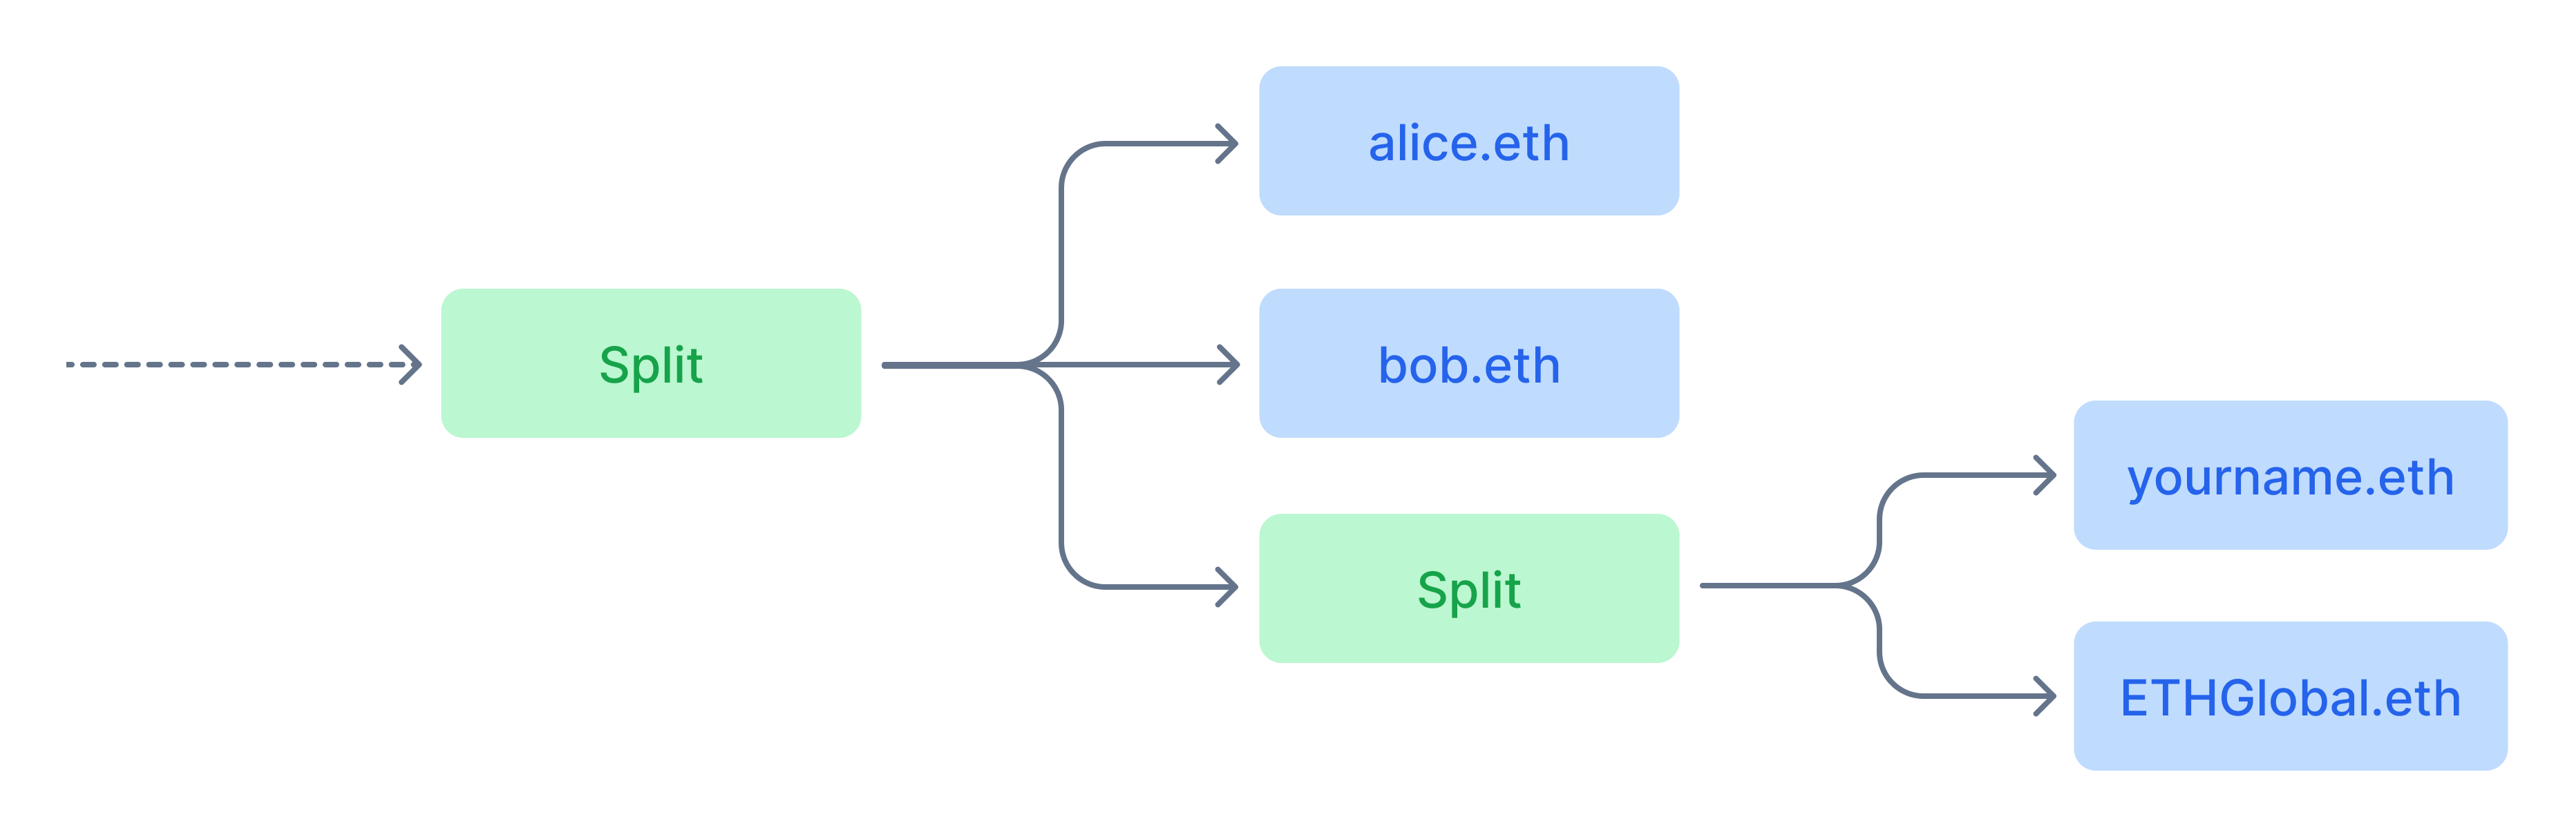 Each Split is a smart contract that continuously splits incoming funds among recipients according to preset ownership percentages